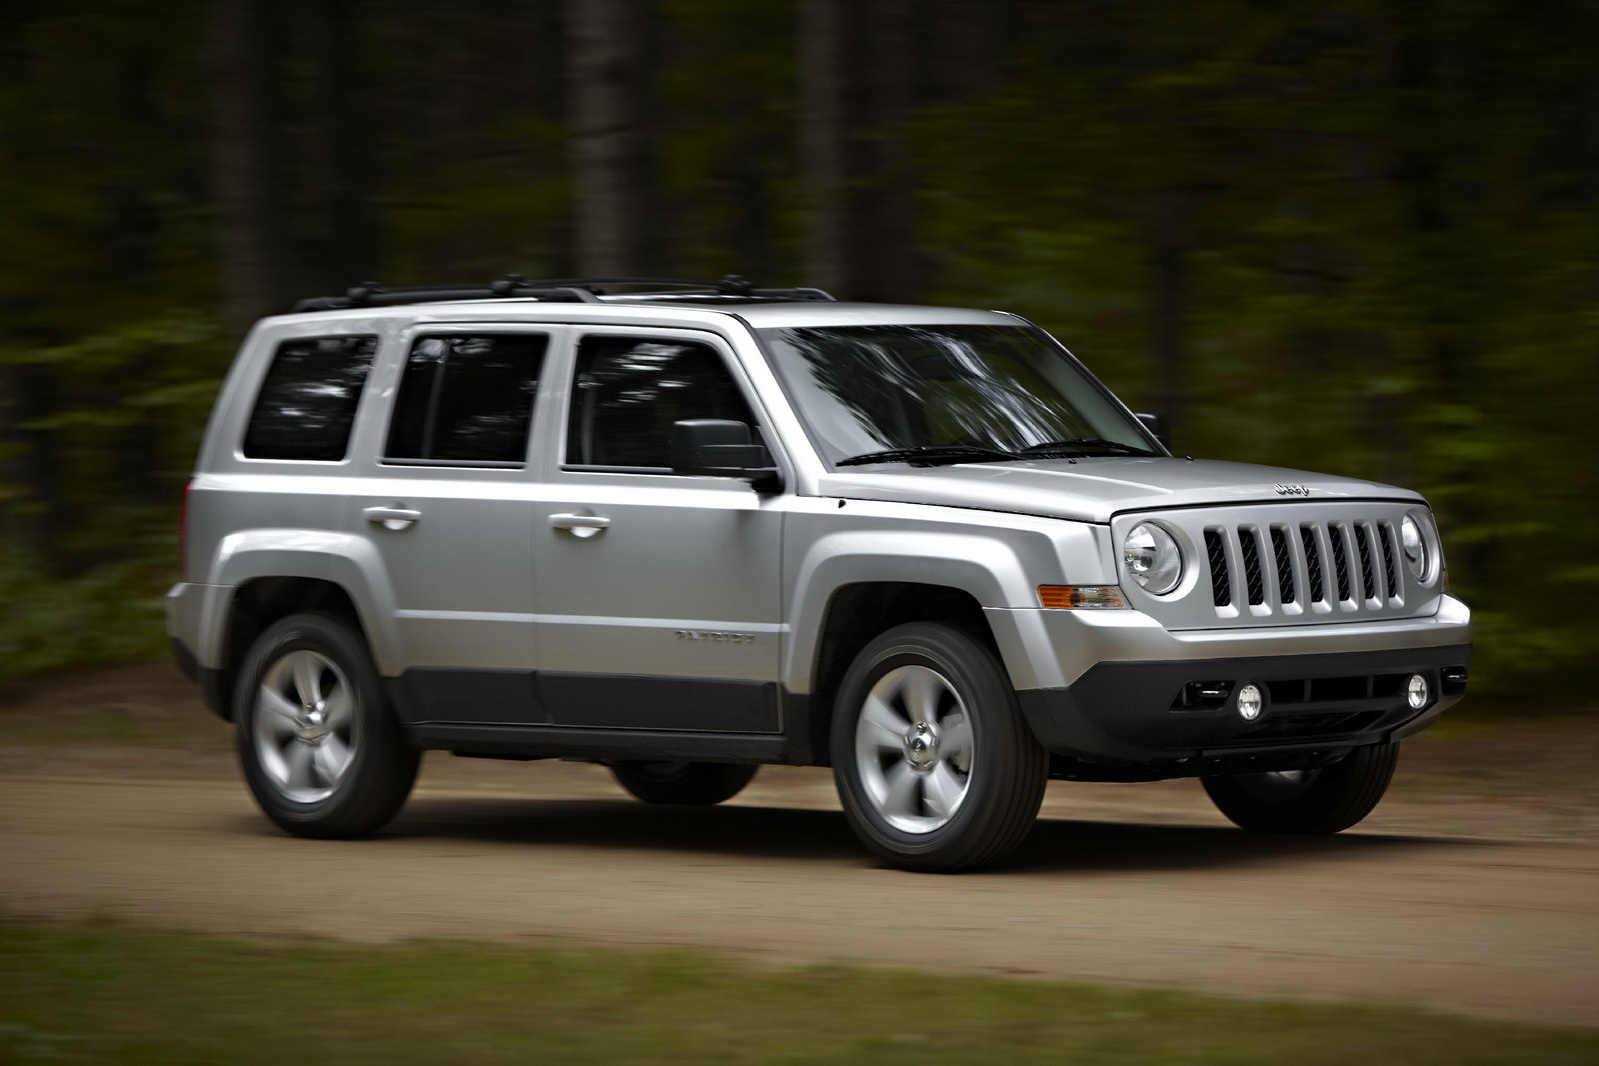 Sport Cars And Motorcycle News 2011 Jeep Patriot